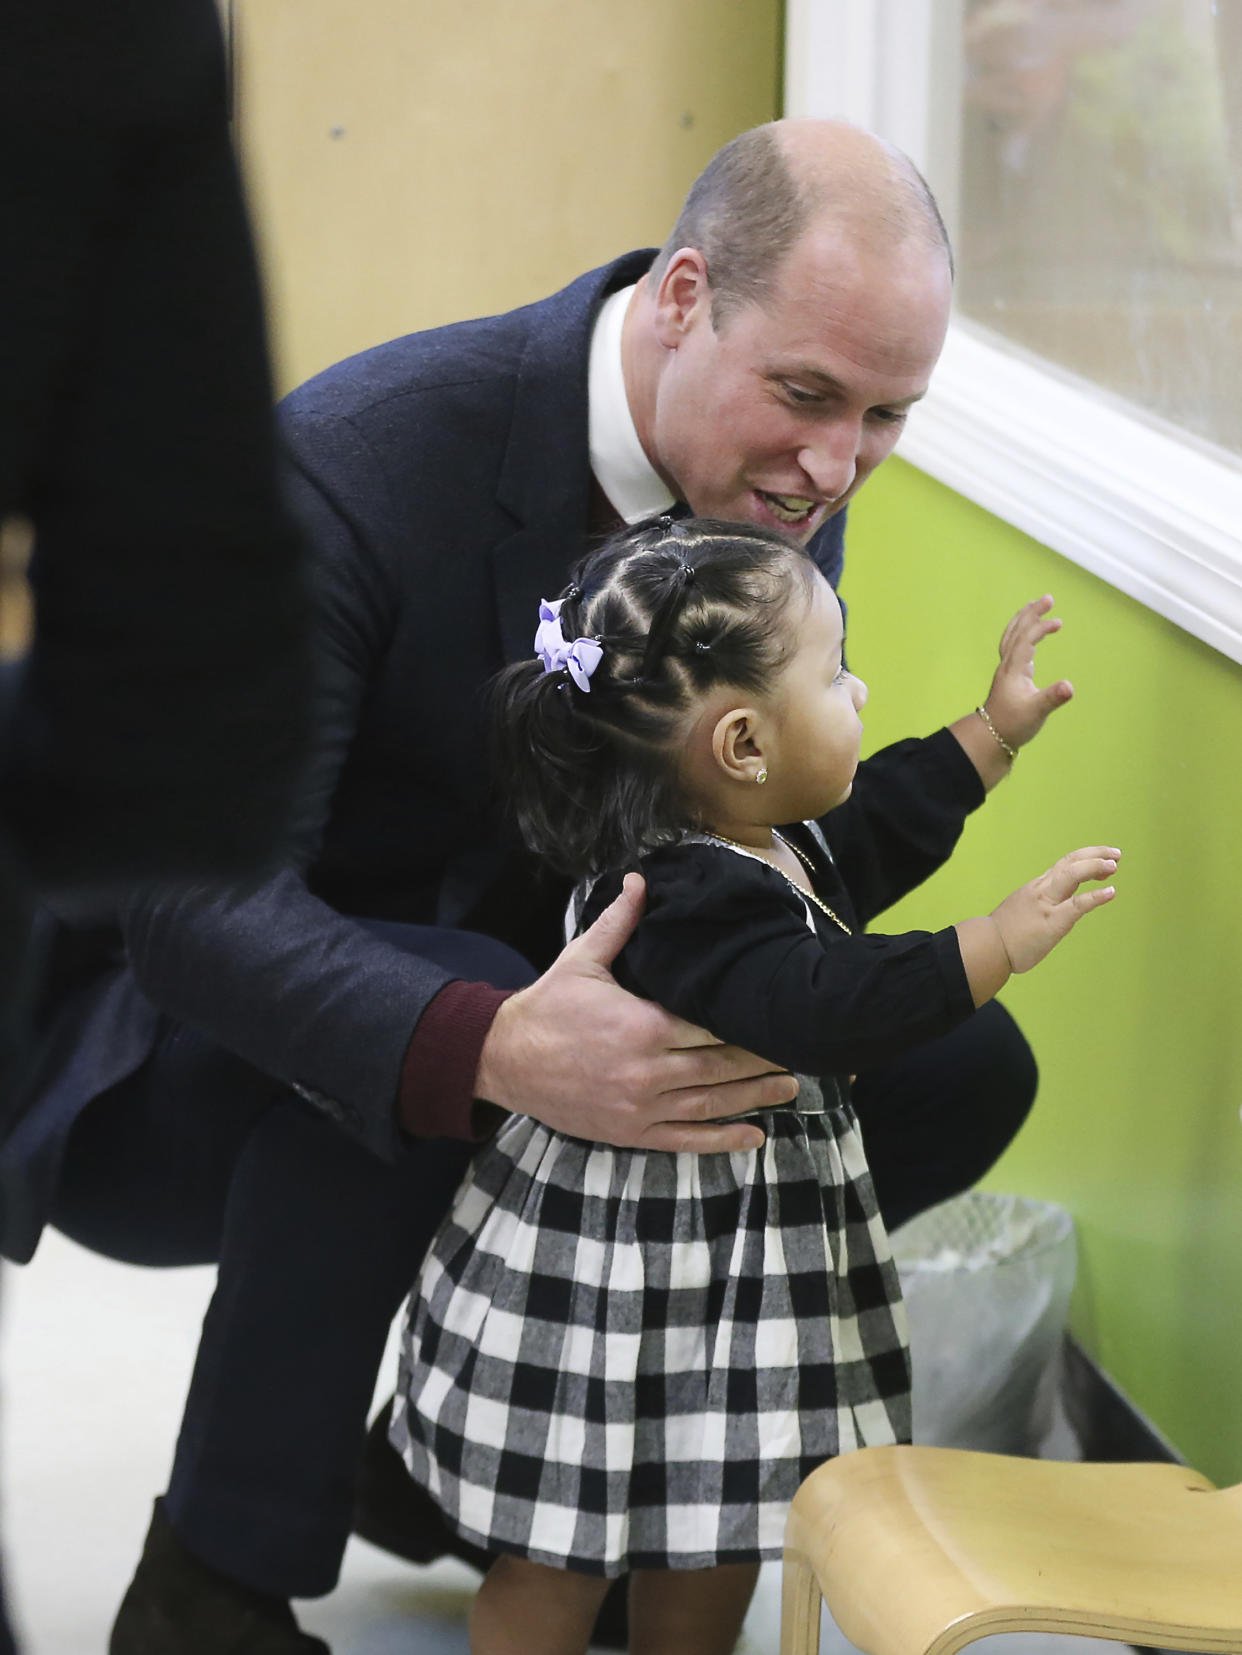 Britain's Prince William engages with 16-month-old Sofia during his visit to Roca on Thursday, Dec. 1, 2022, in Chelsea, Ma. (Nancy Lane/The Boston Herald via AP, Pool)